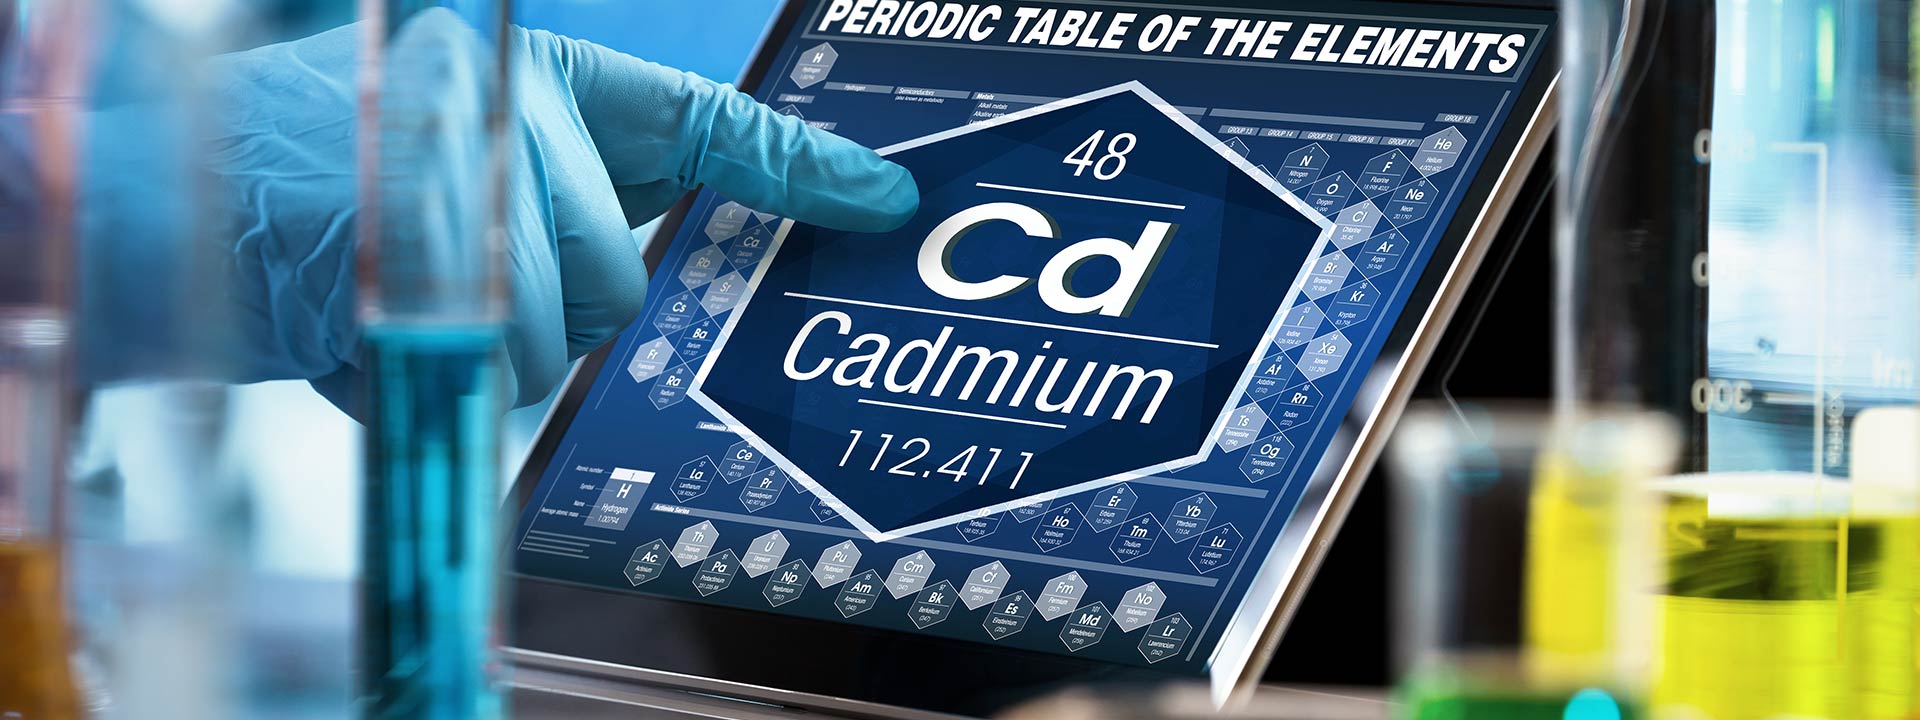 Period Table of the Elements - Cadmium